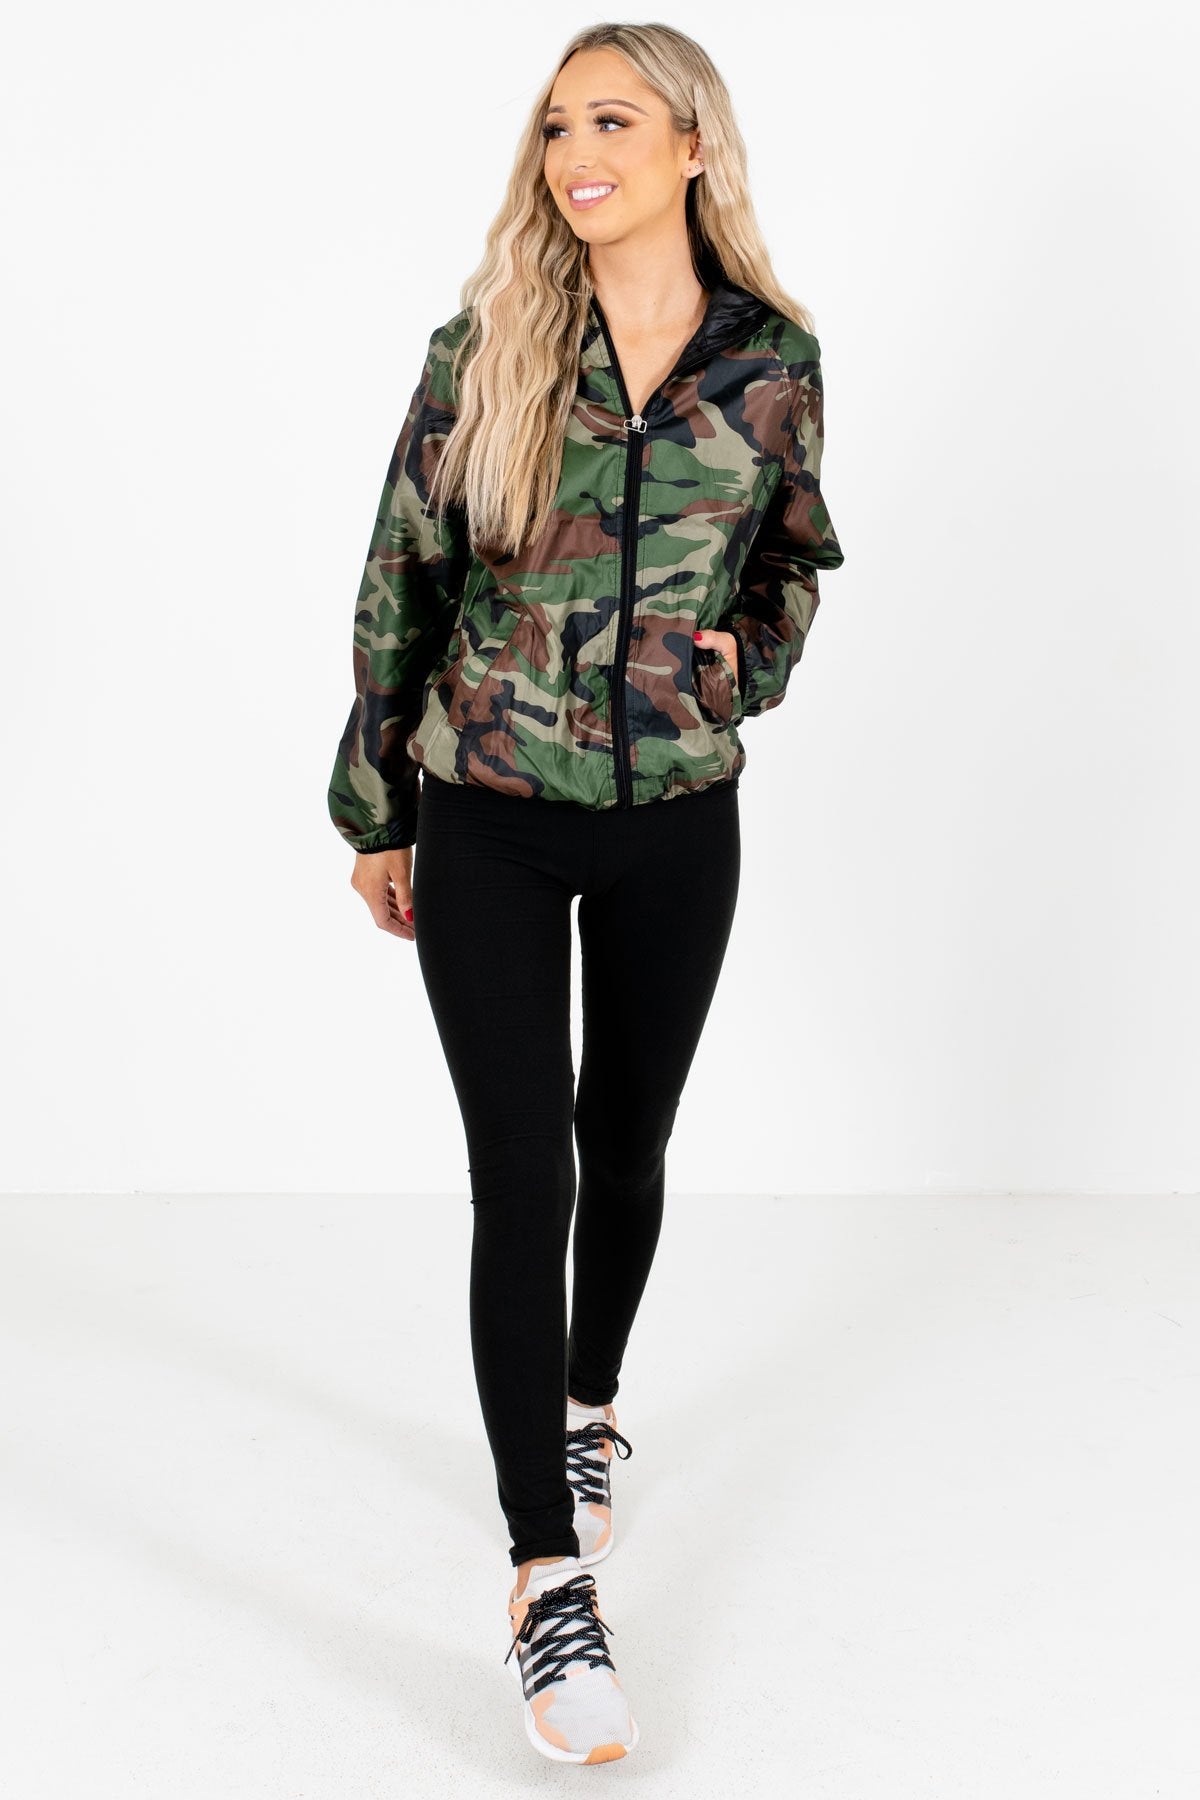 Green Camo Cute and Comfortable Boutique Windbreaker Jackets for Women 